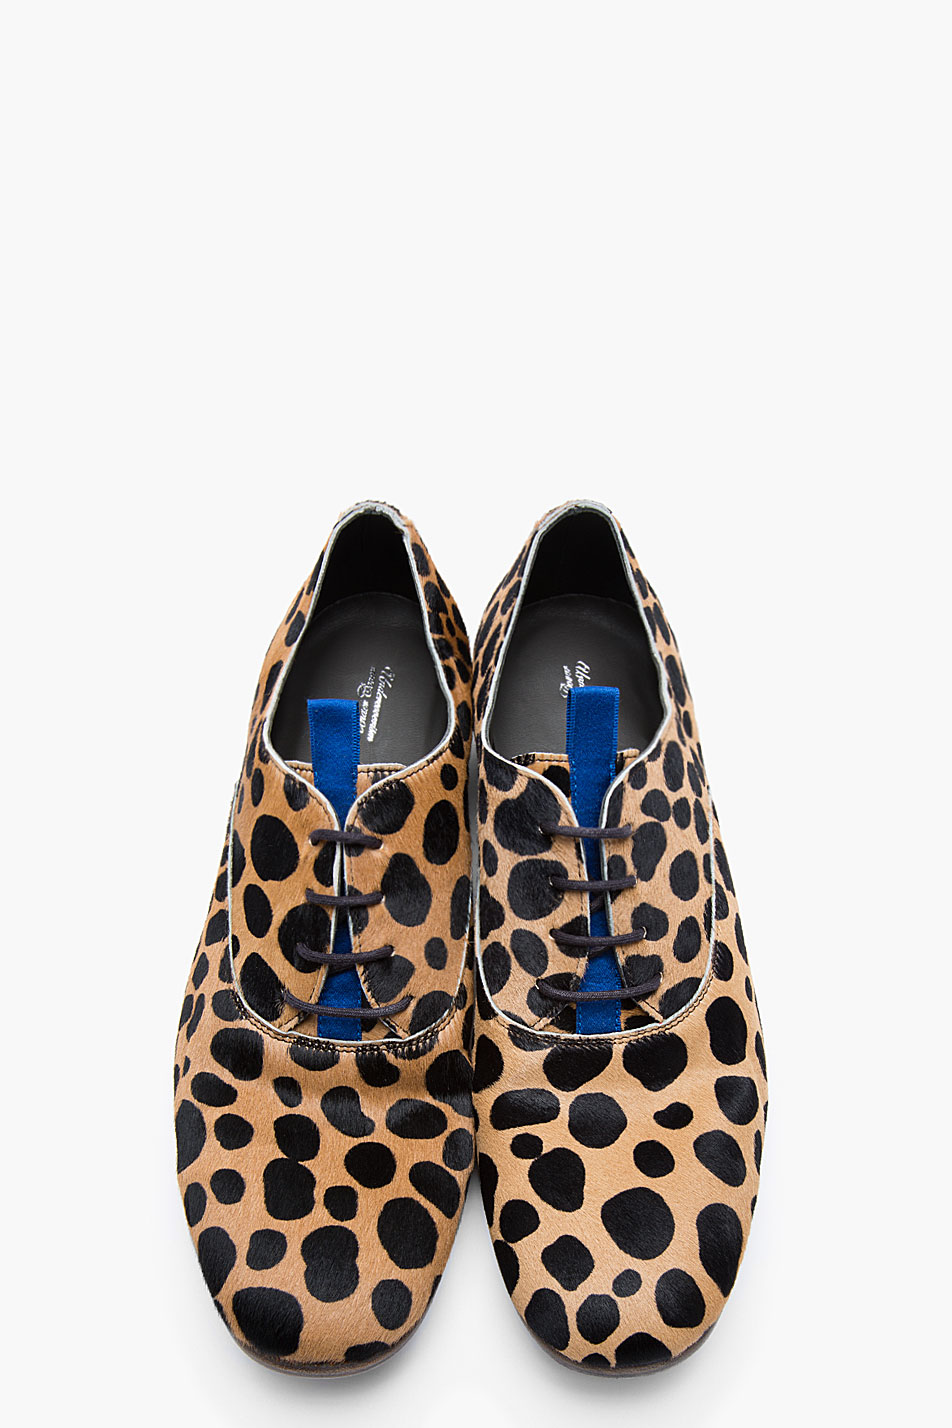 'Psycho Killer' The Talking Heads inspired leopard print shoes ...